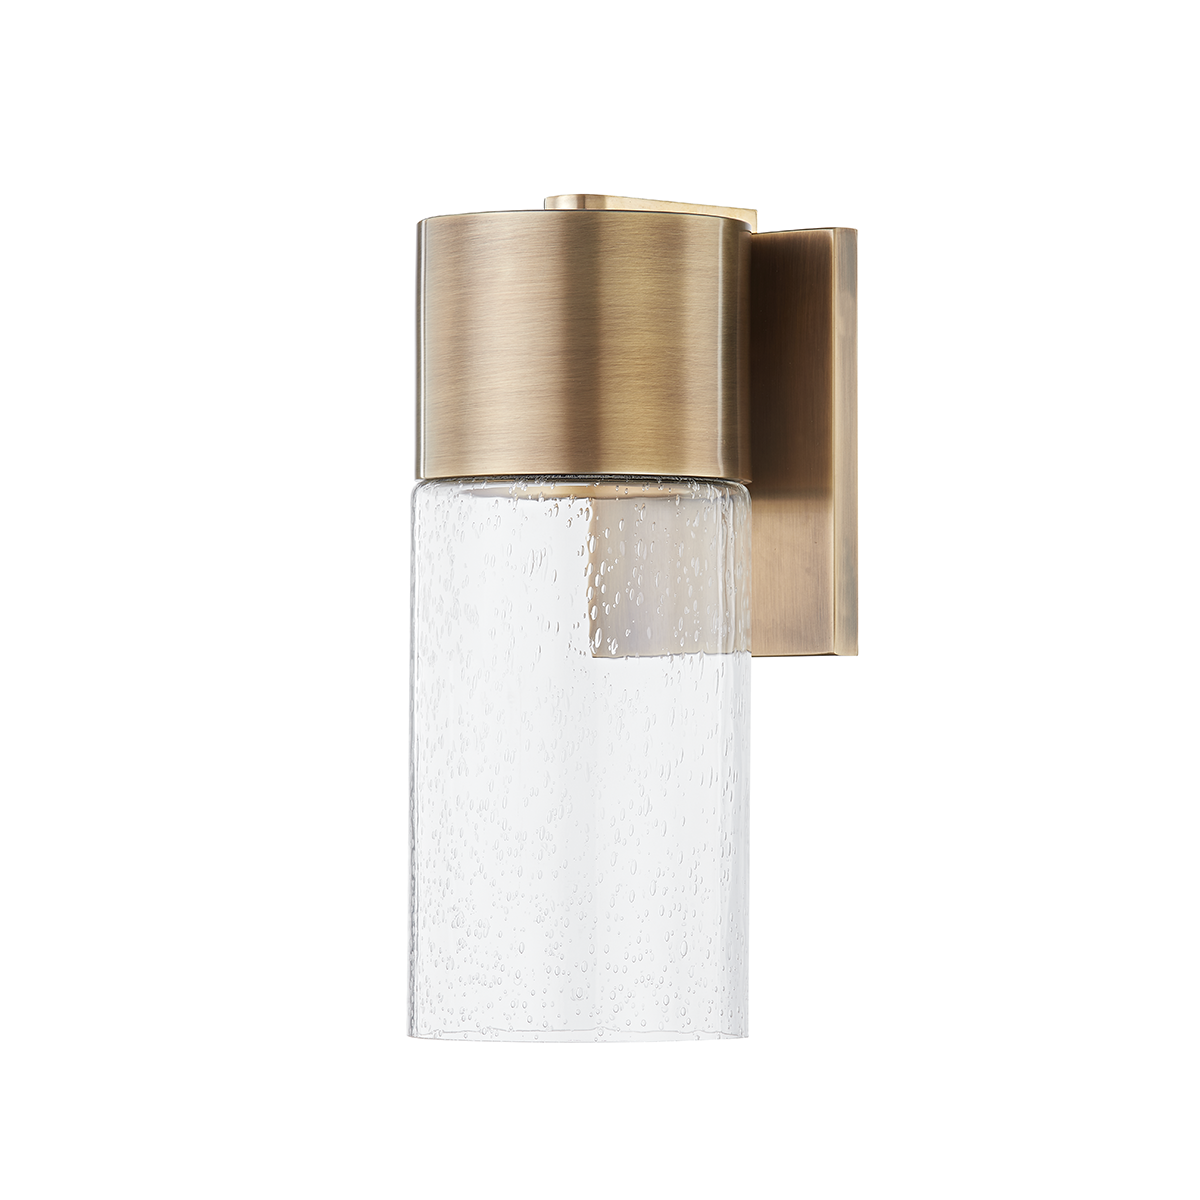 Troy Lighting 1 LIGHT SMALL EXTERIOR WALL SCONCE B5115 Outdoor l Wall Troy Lighting PATINA BRASS  